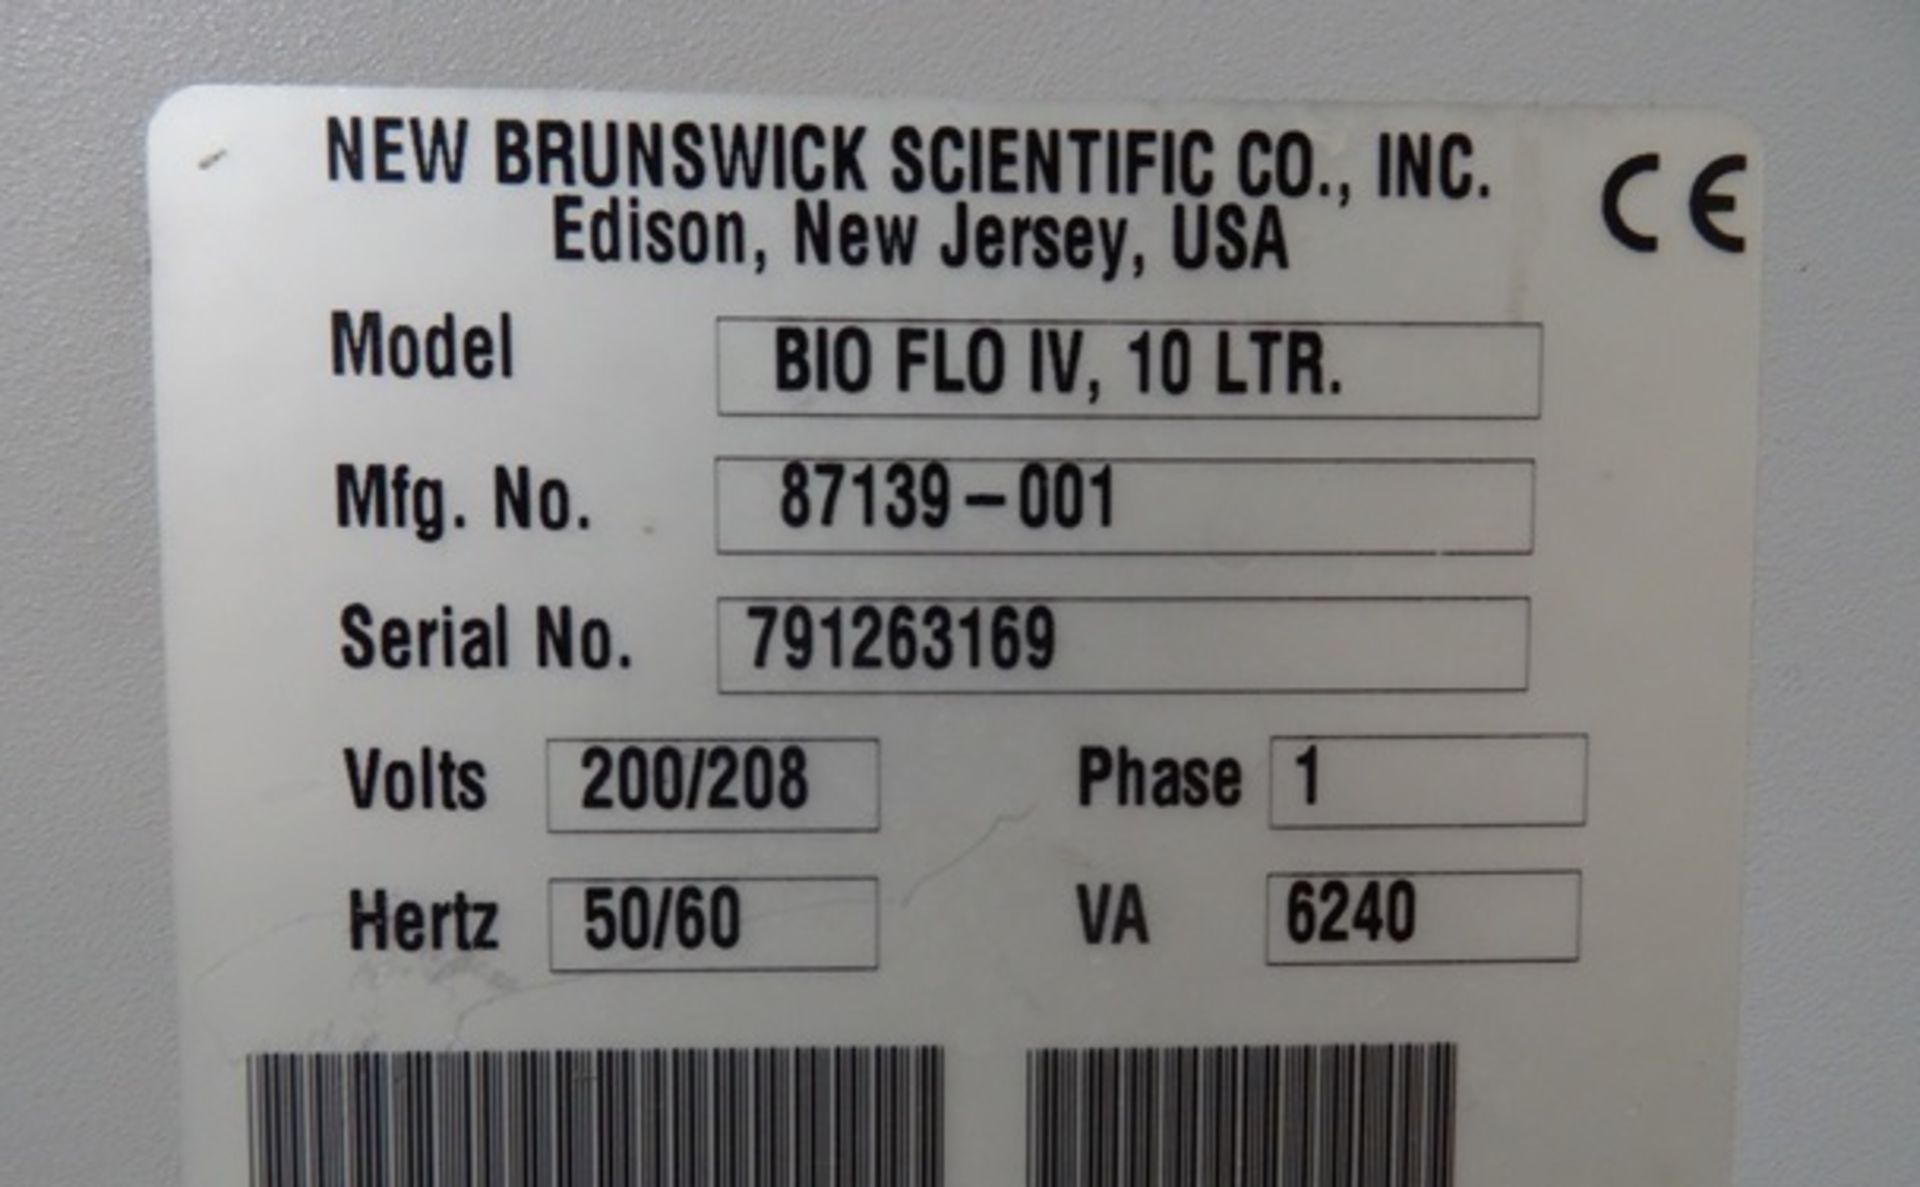 10 liter New Brunswick fermenter, model BioFlo 4, stainless steel construction, rated 40 psi at - Image 9 of 9